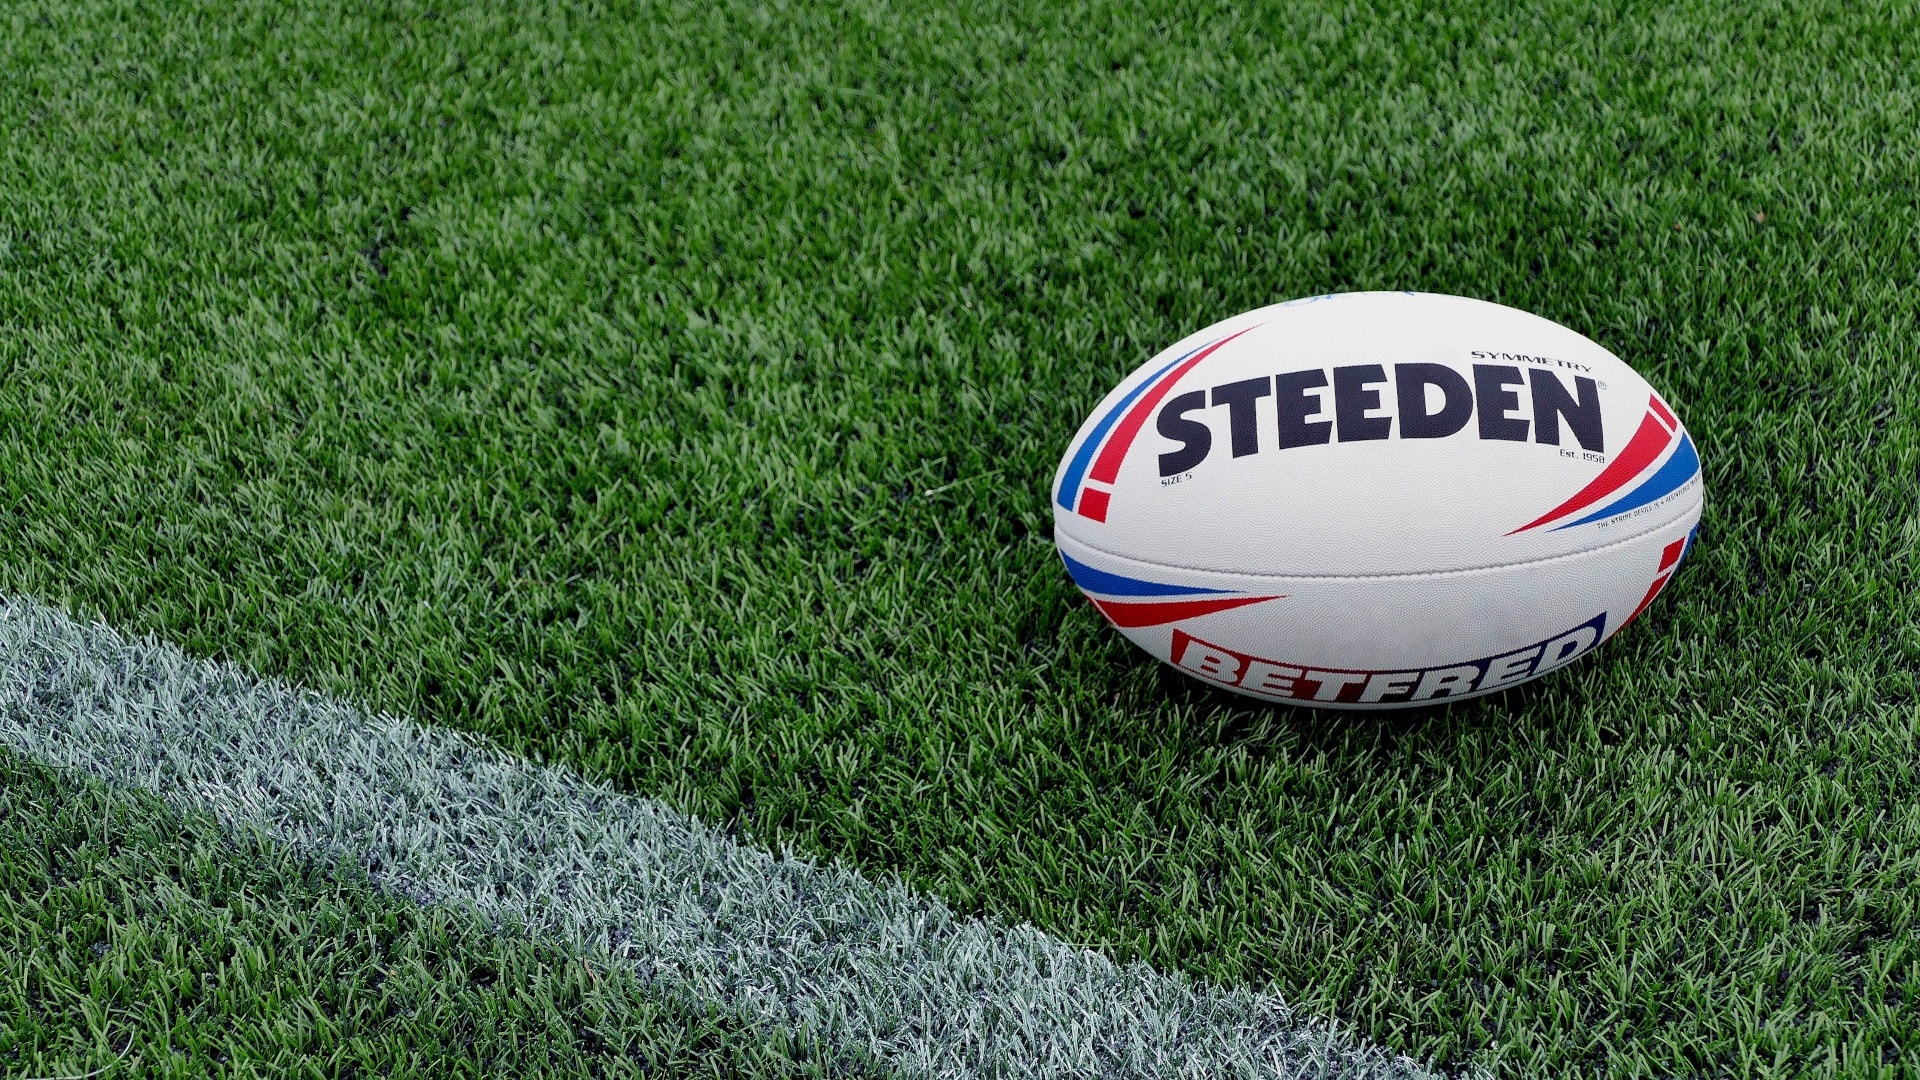 Rugby League: A standard gridiron football ball produced by Steeden, Equipment for a competitive ball sport. 1920x1080 Full HD Background.